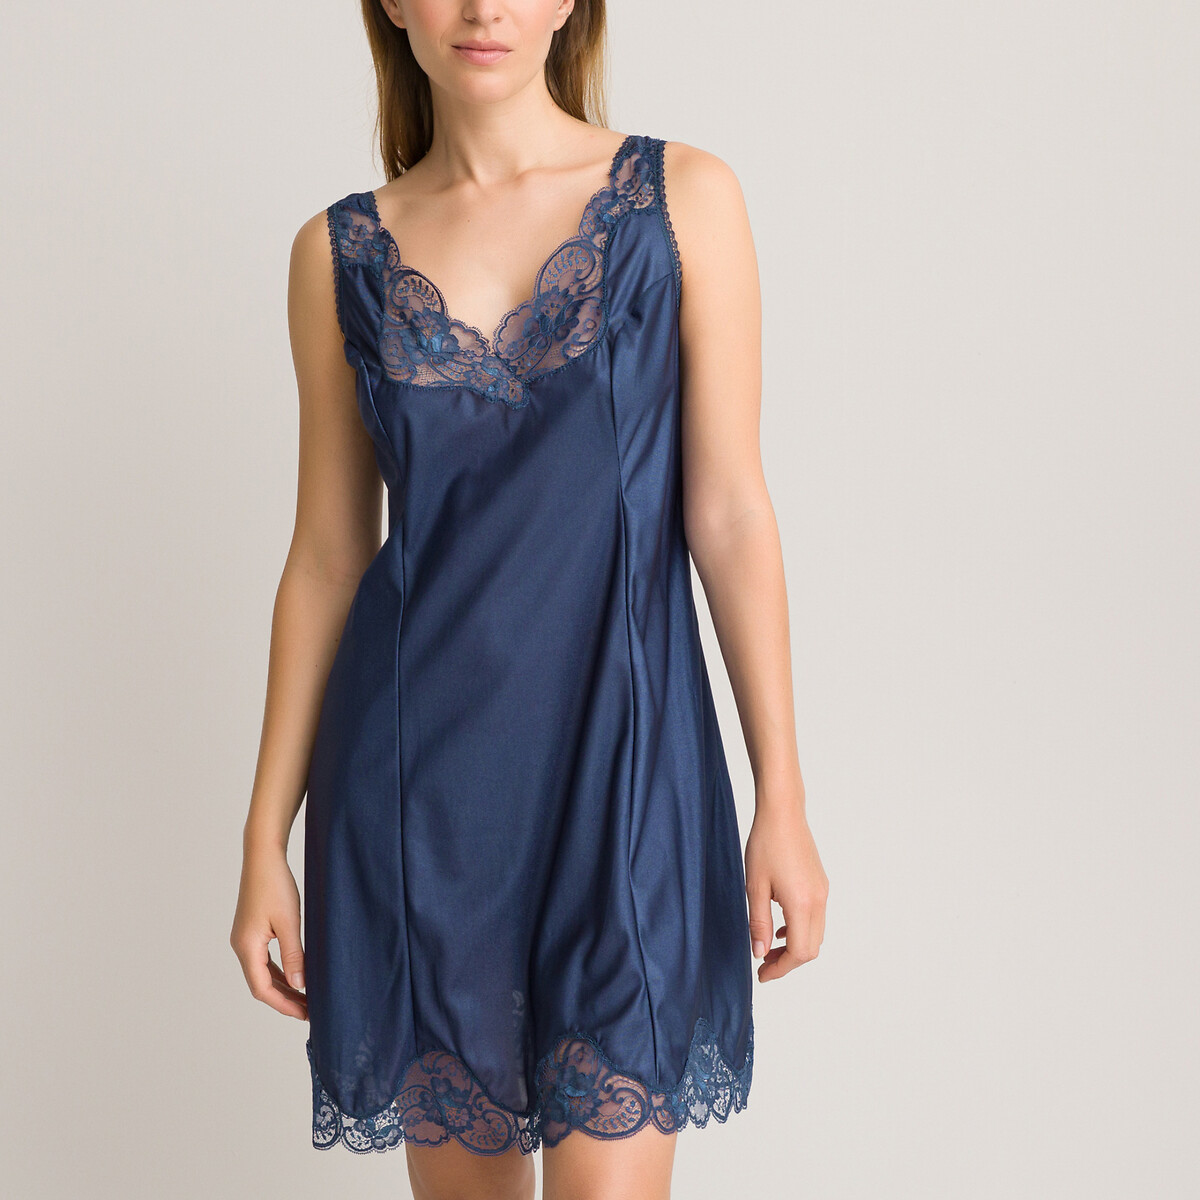 Calais lace full slip, made in france ...